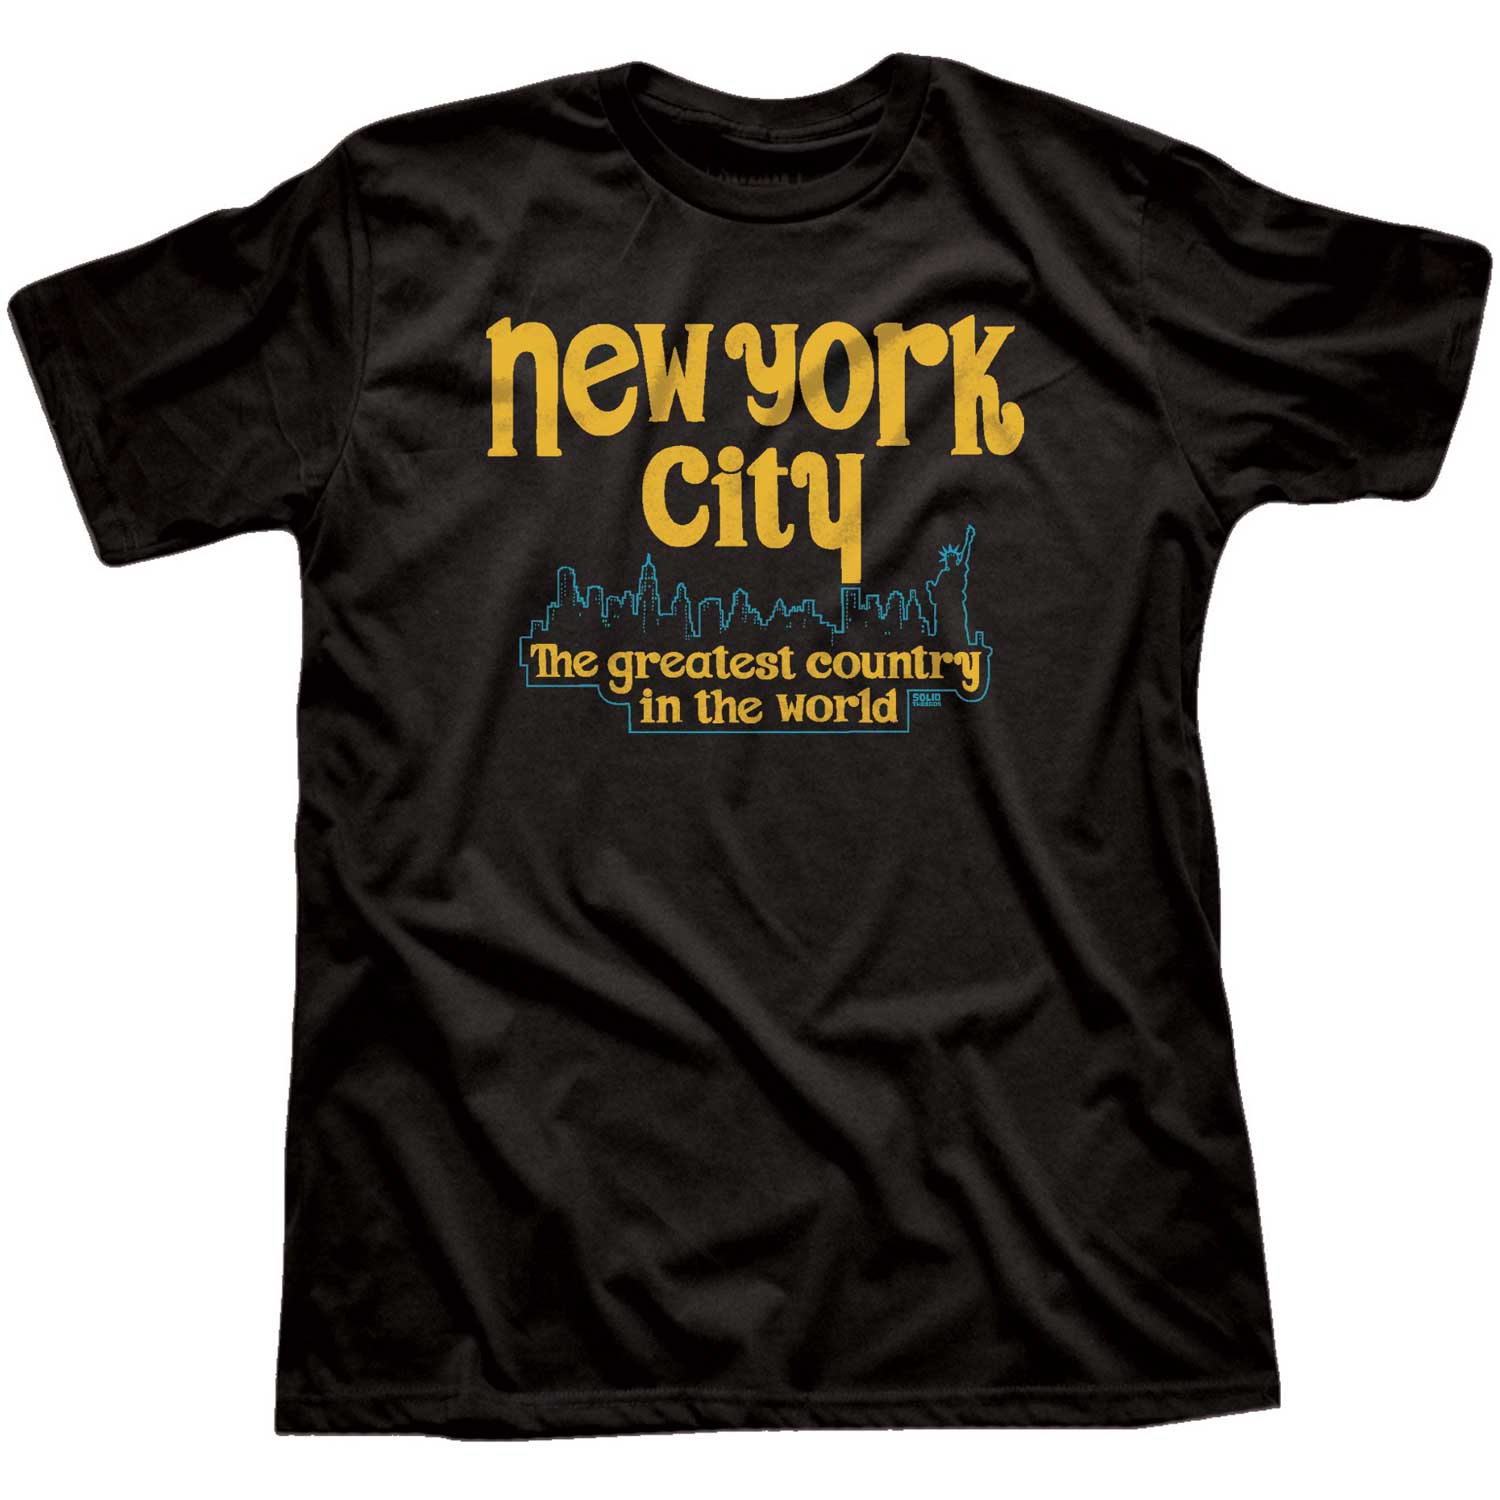 Men's New York City The Greatest Country In the World Vintage Inspired T-shirt | Funny NYC Graphic Tee On Model| Solid Threads